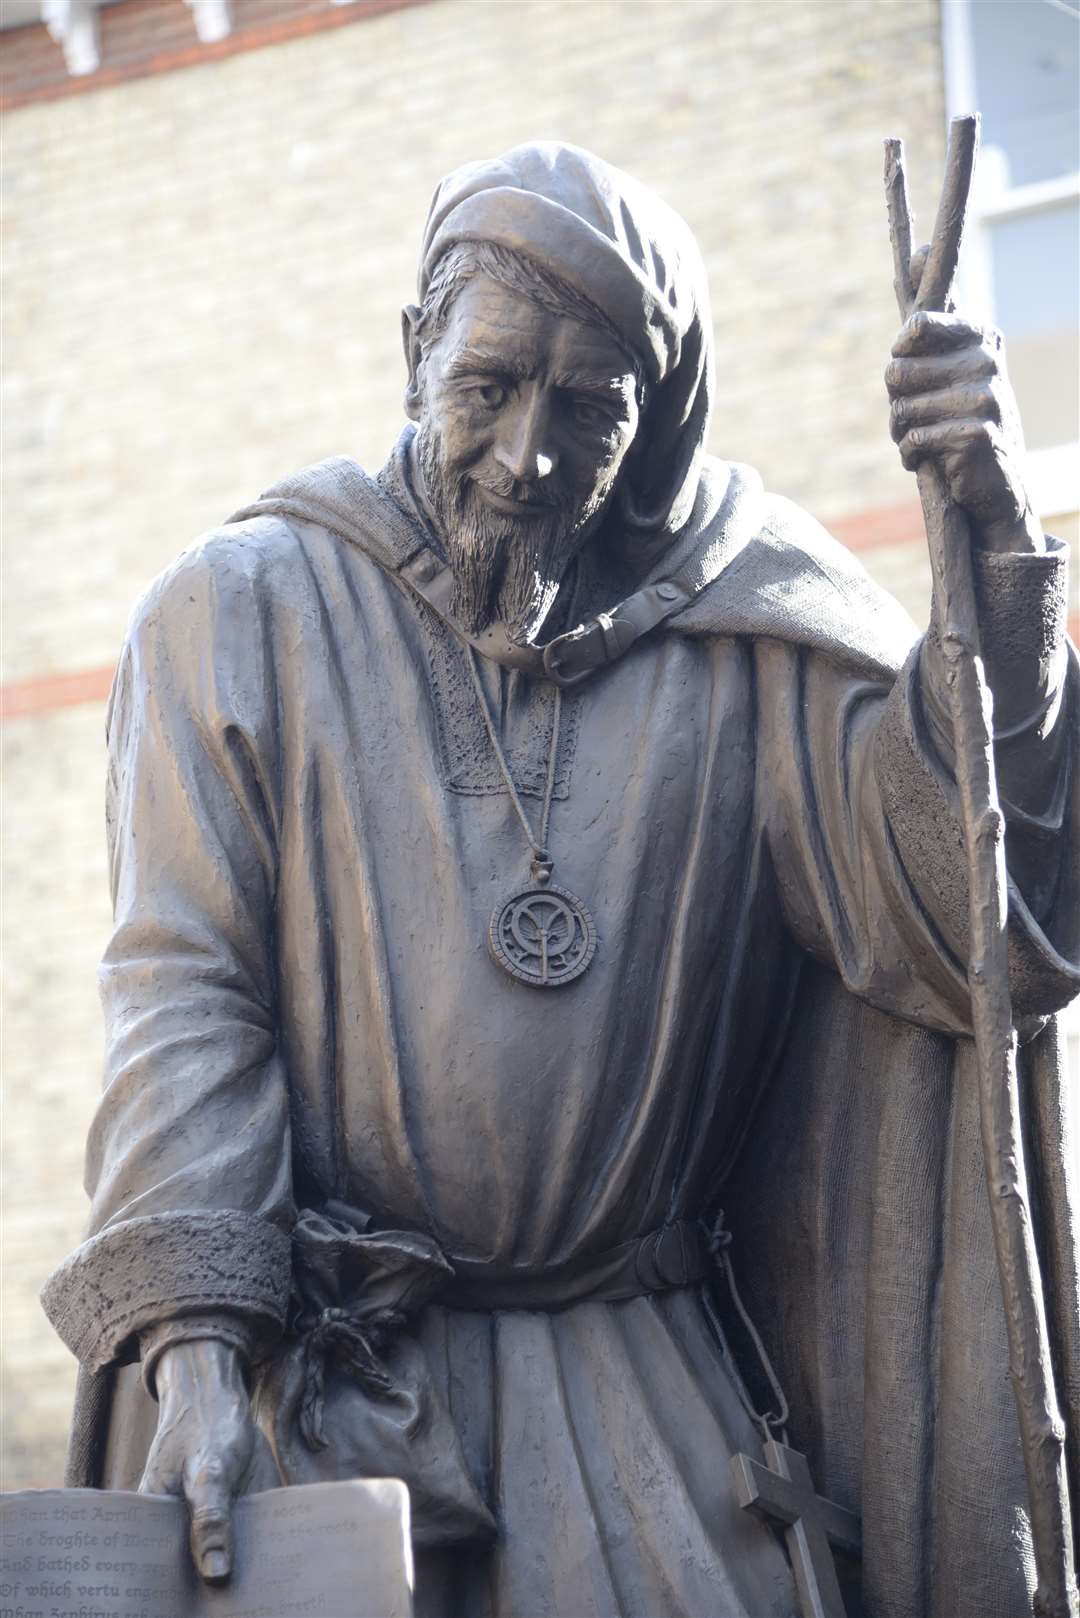 The Geoffrey Chaucer statue in Canterbury